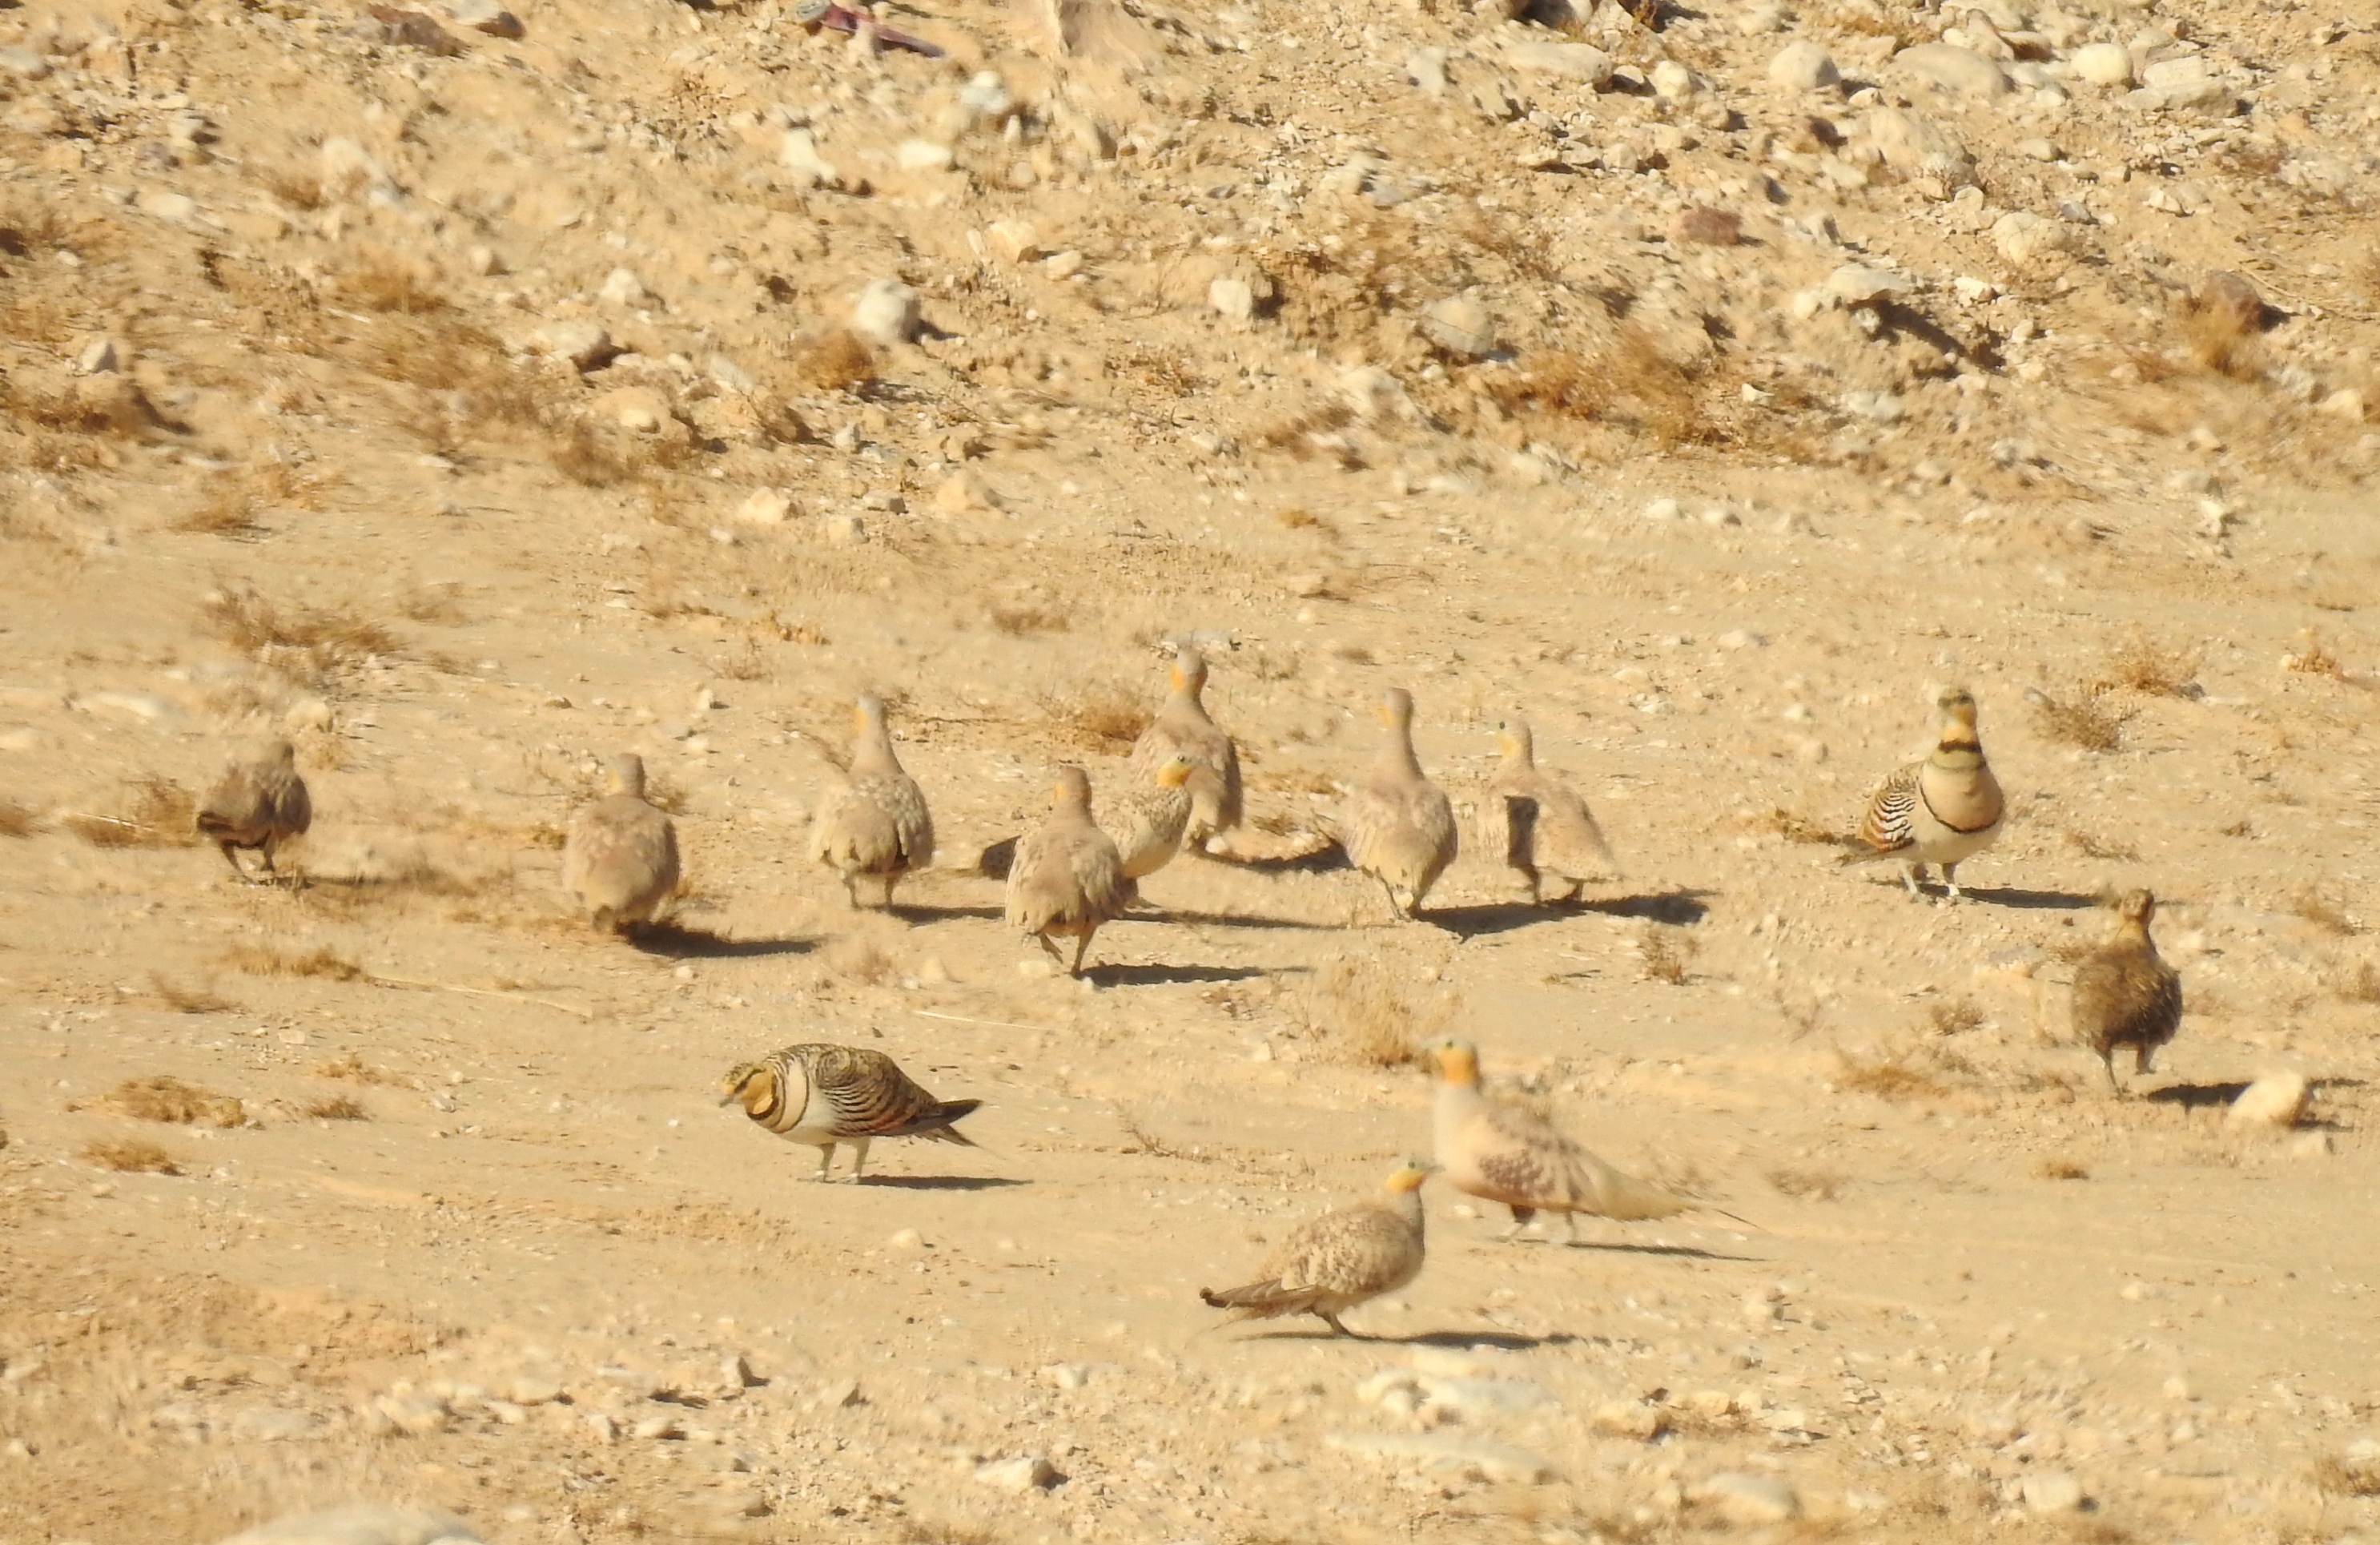 Spotted sandgrouse making an appearance from a distance